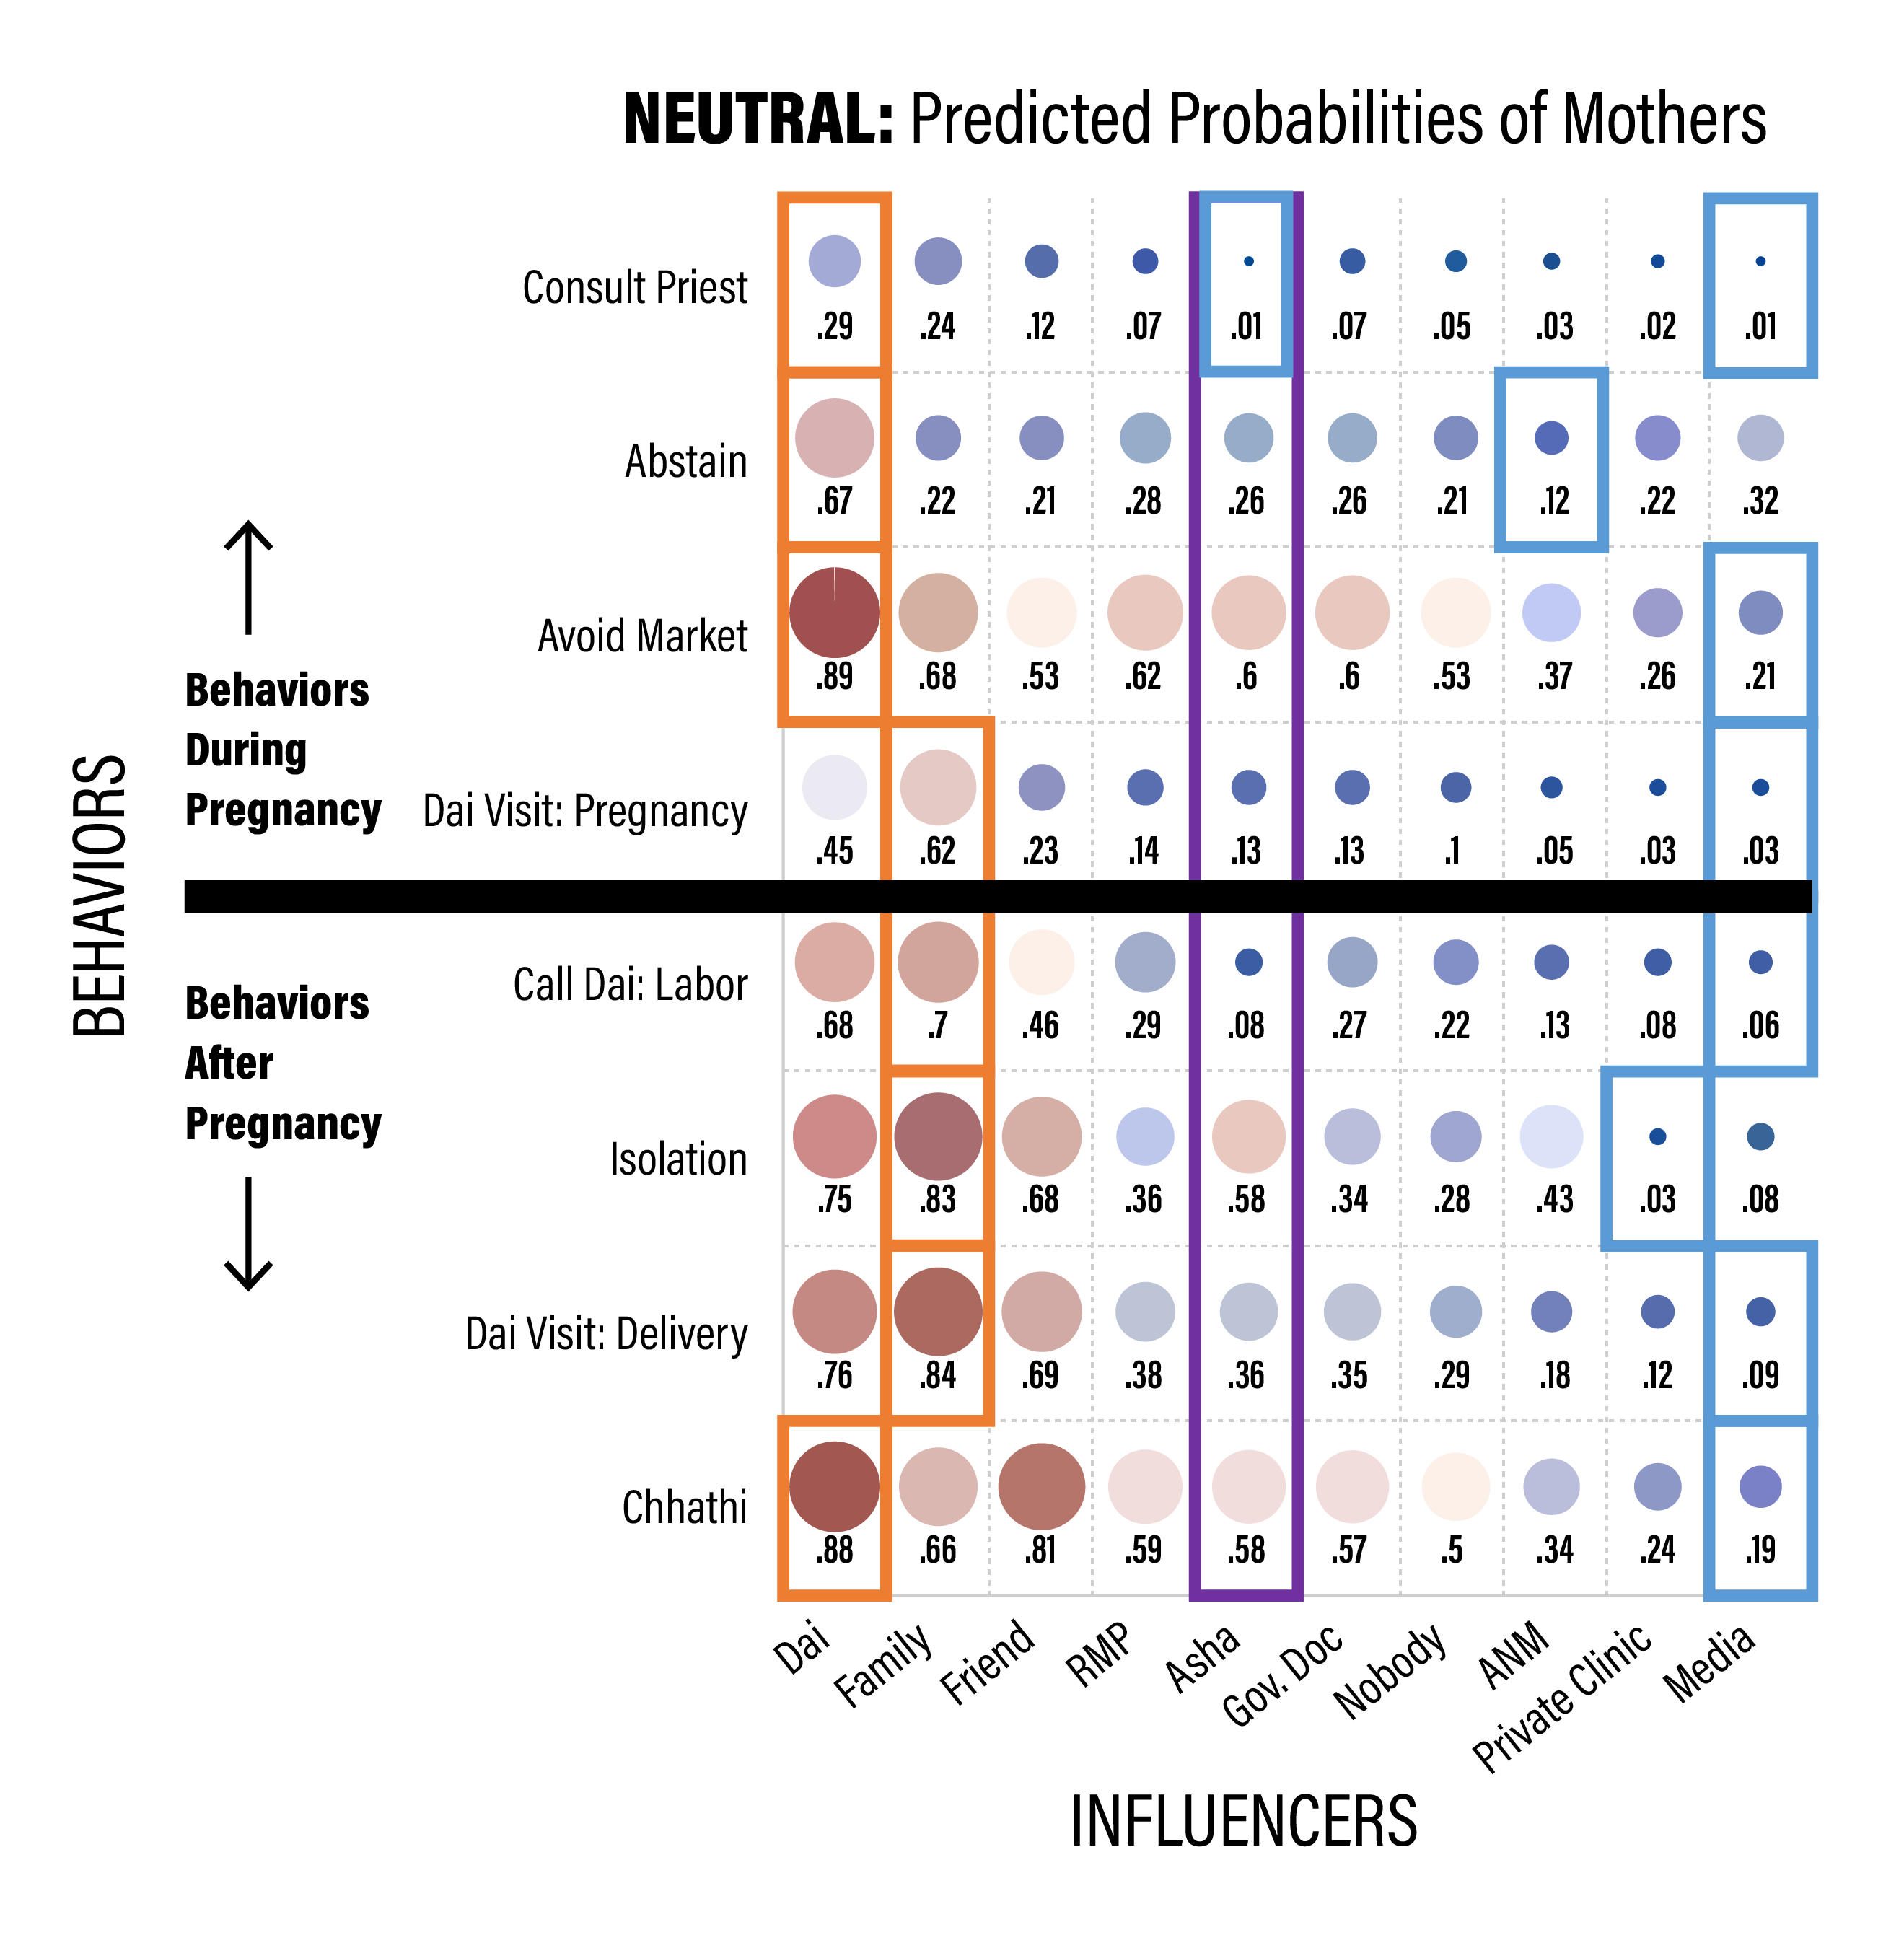 ASHA positioning as an influencer of neutral behaviors for recent mothers. The red squares toward the left are around the largest value for each row, indicating the strongest positive influencer for that behavior, and the blue squares are for the lowest value for each row, indicating the lowest influencer for that behavior.